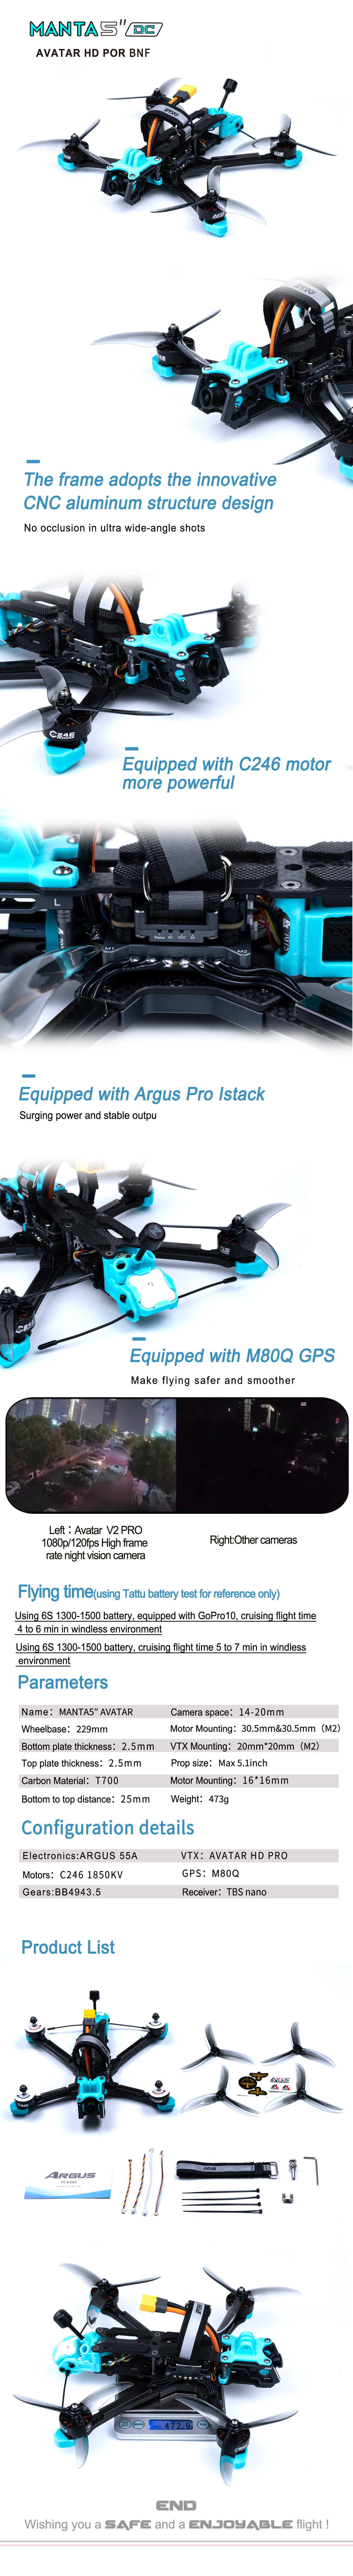 Axisflying MANTA5" / 5inch Walksnail Avatar HD Pro Kit fpv freestyle DeadCat-DC with GPS -6S MANTA 5" DC BNF cinematic drone,cinewhoop drone,longrange drone,freestyle drone,fpv drone,fpv quads,5inch freestyle drone,7inch longrange drone,5inch quads,6inch quads,7inch LR quads,7" fpv drone,7" fpv quads,7" longrange quads,6" cinematic quads,5"cinematic drone,DJI O3,DJI O3 Air Unit